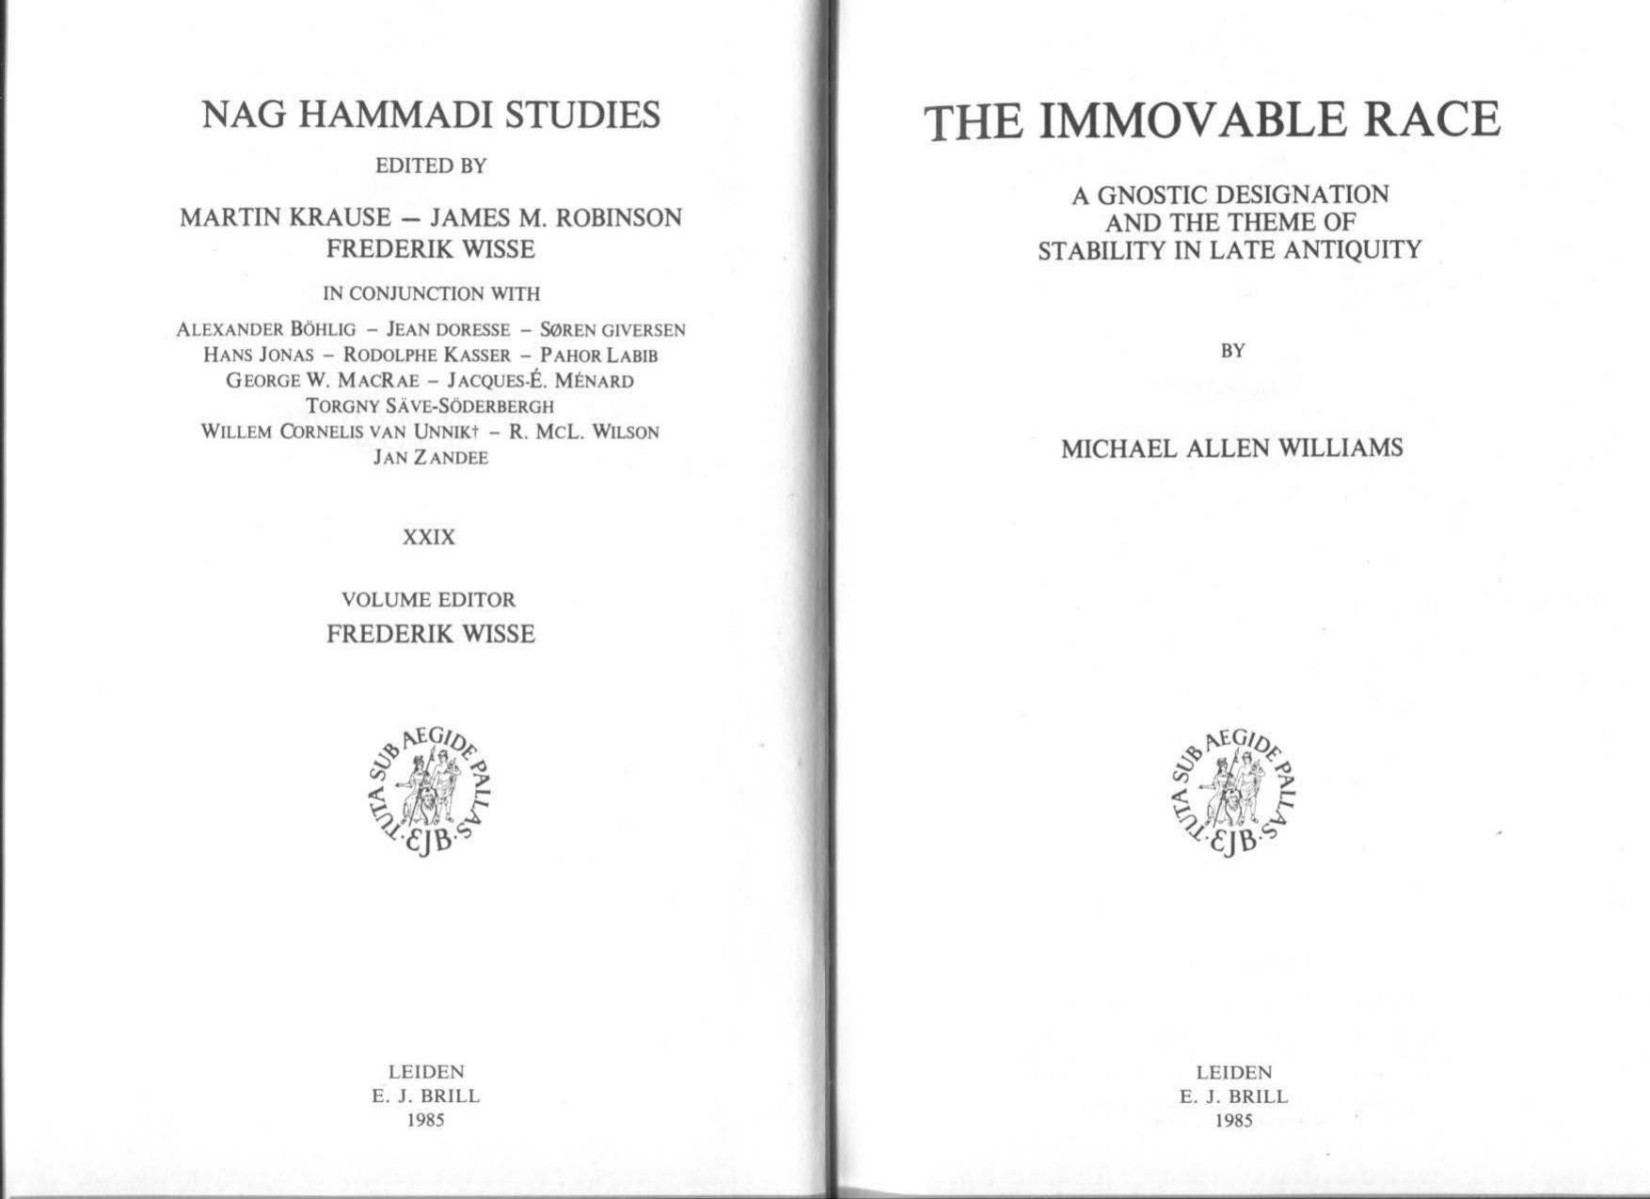 The Immovable Race - A Gnostic Designation and the Theme of Stability in Late Antiquity (Michael A. Williams)9789004075979